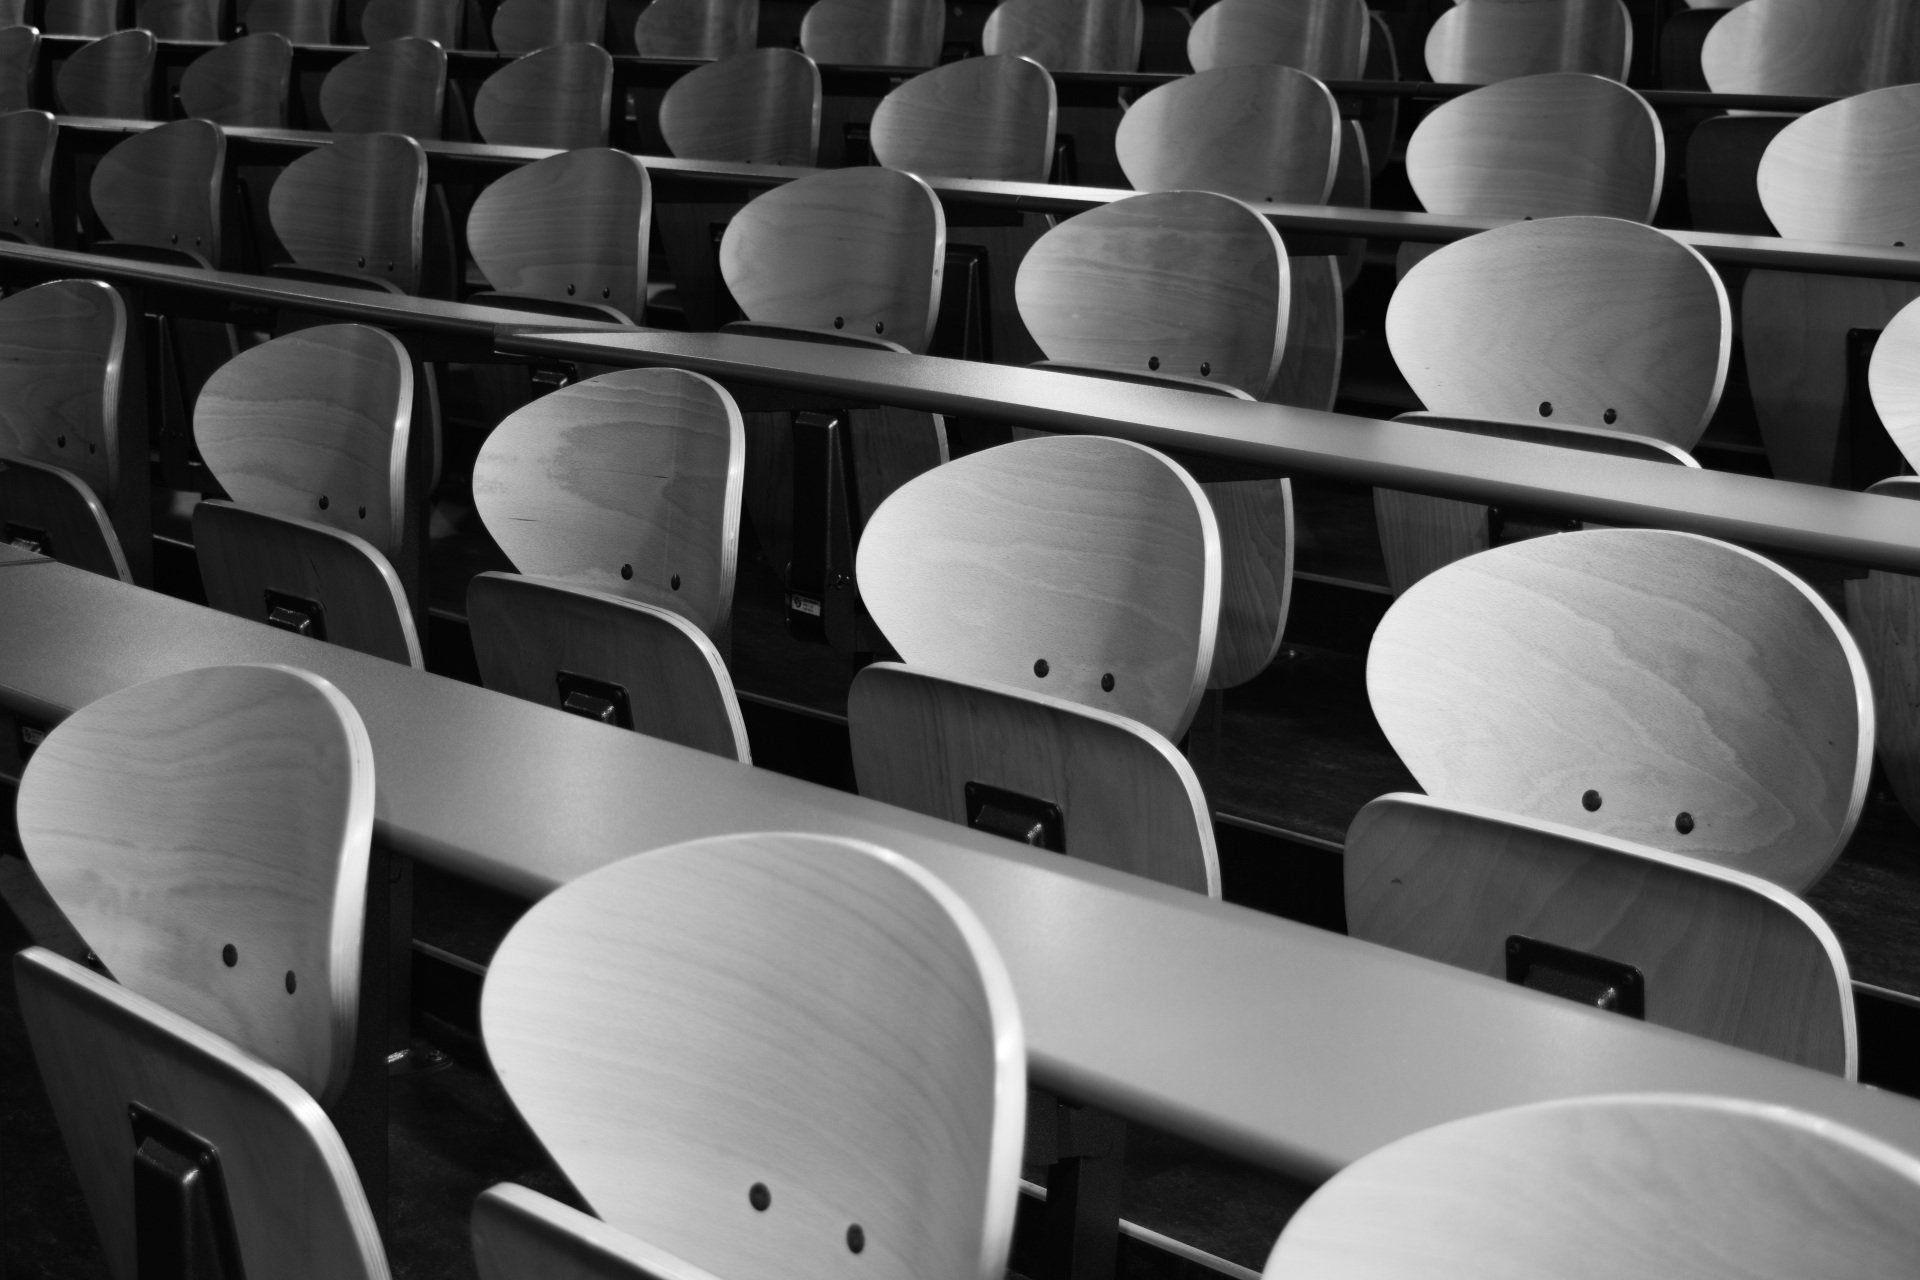 A black and white photo of rows of wooden chairs in an auditorium